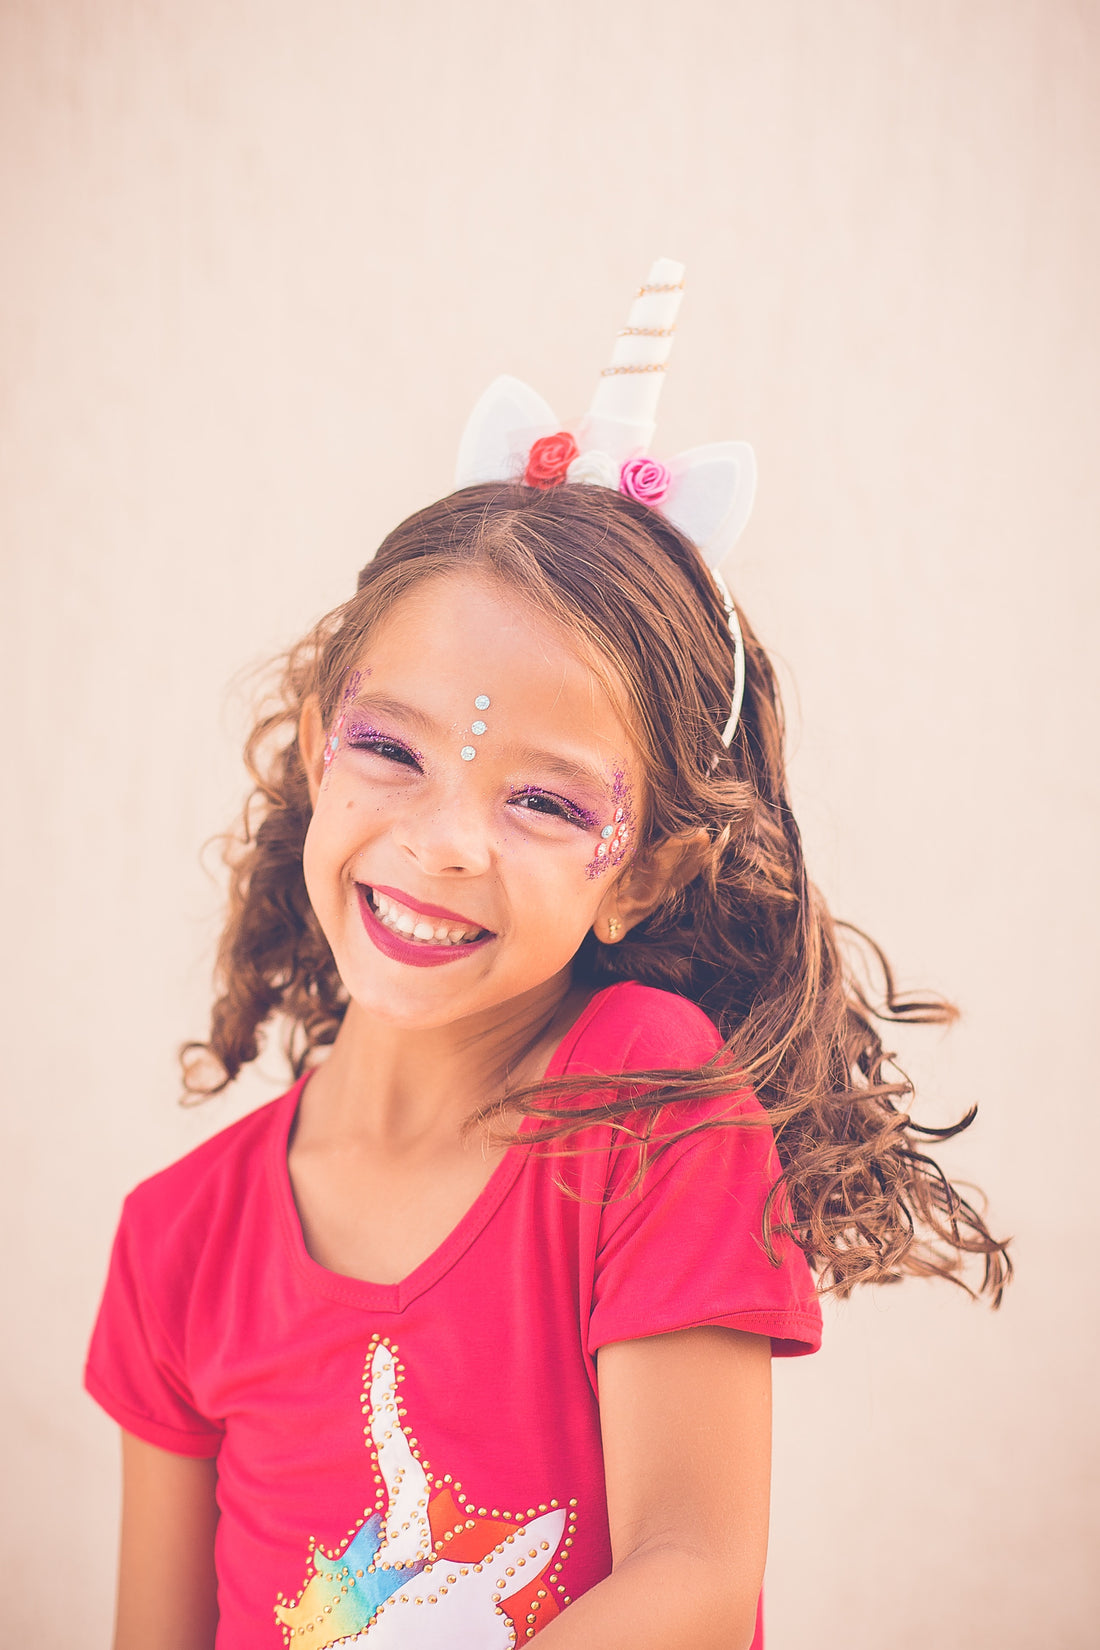 Girl smiling wearing costume on pink background, for AutoBrush